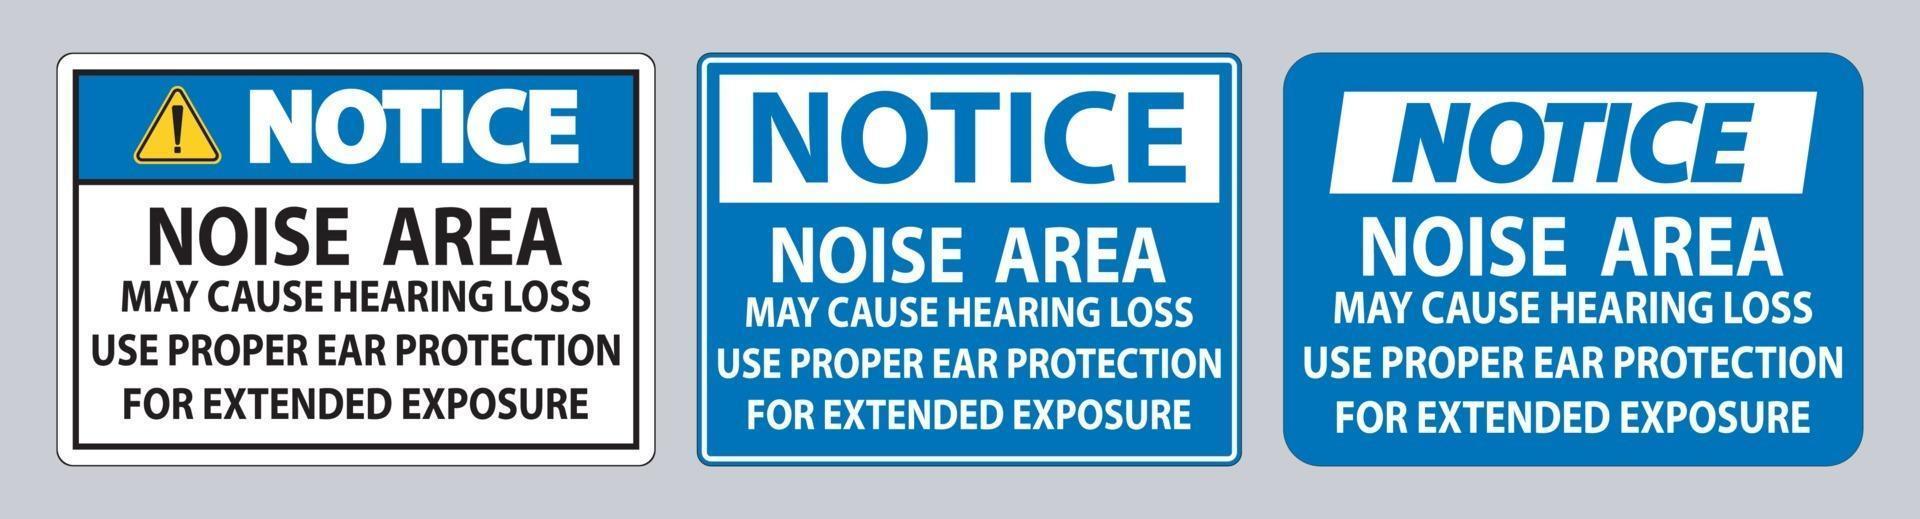 Noise Area May Cause Hearing Loss Use Proper Ear Protection For Extended Exposure vector